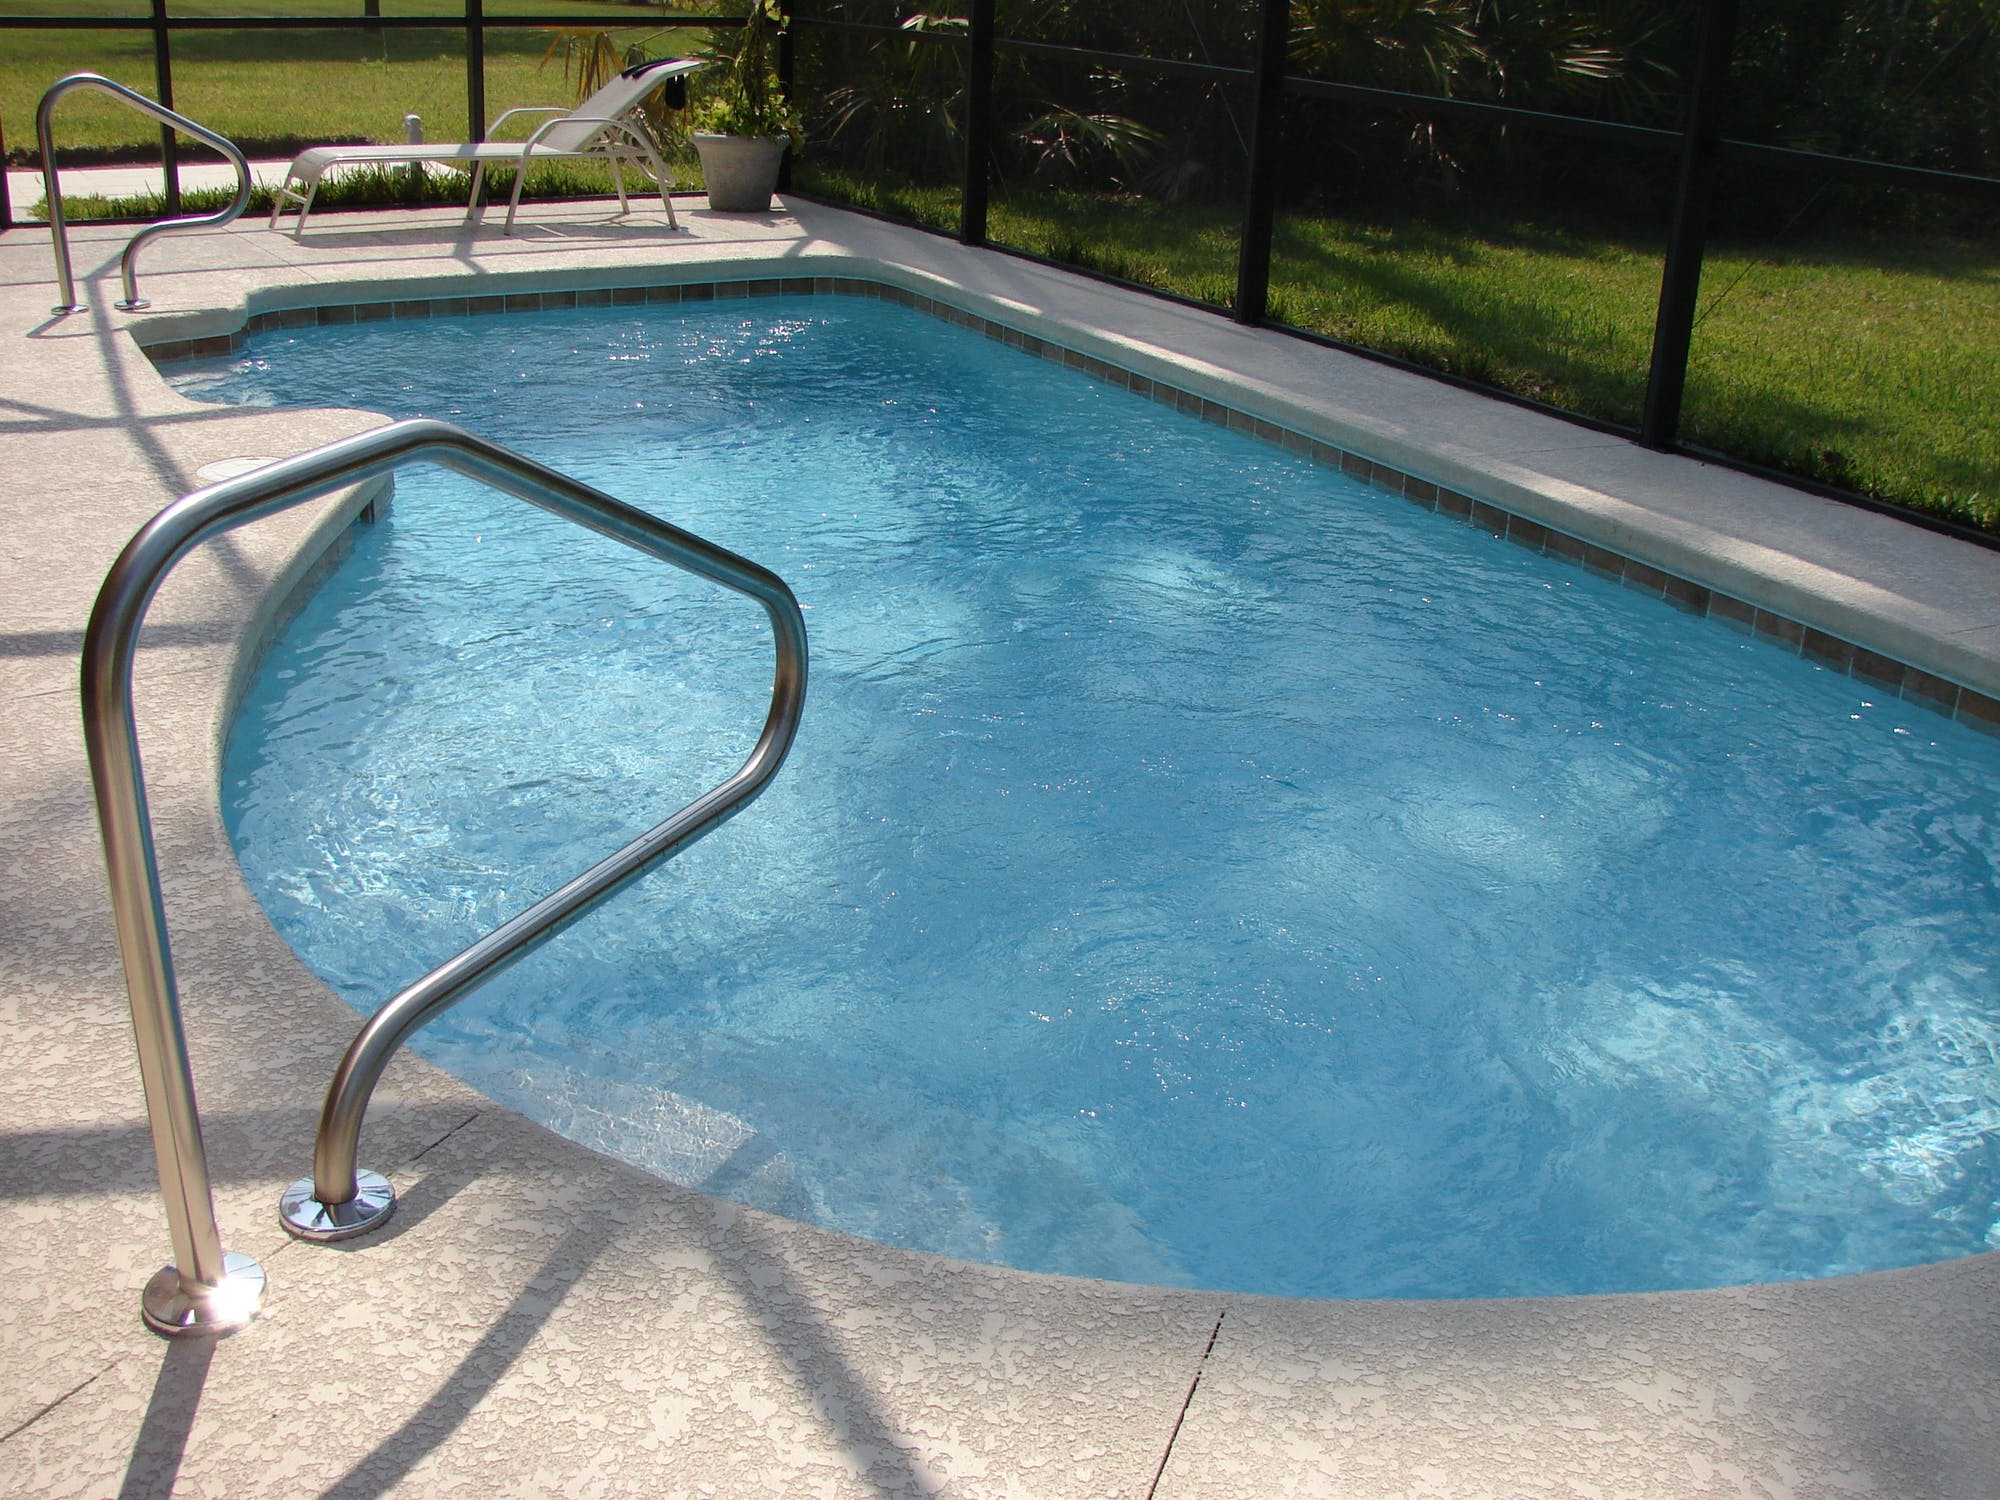 How Our Vinyl Lined In-Ground Pool Installation Process Works